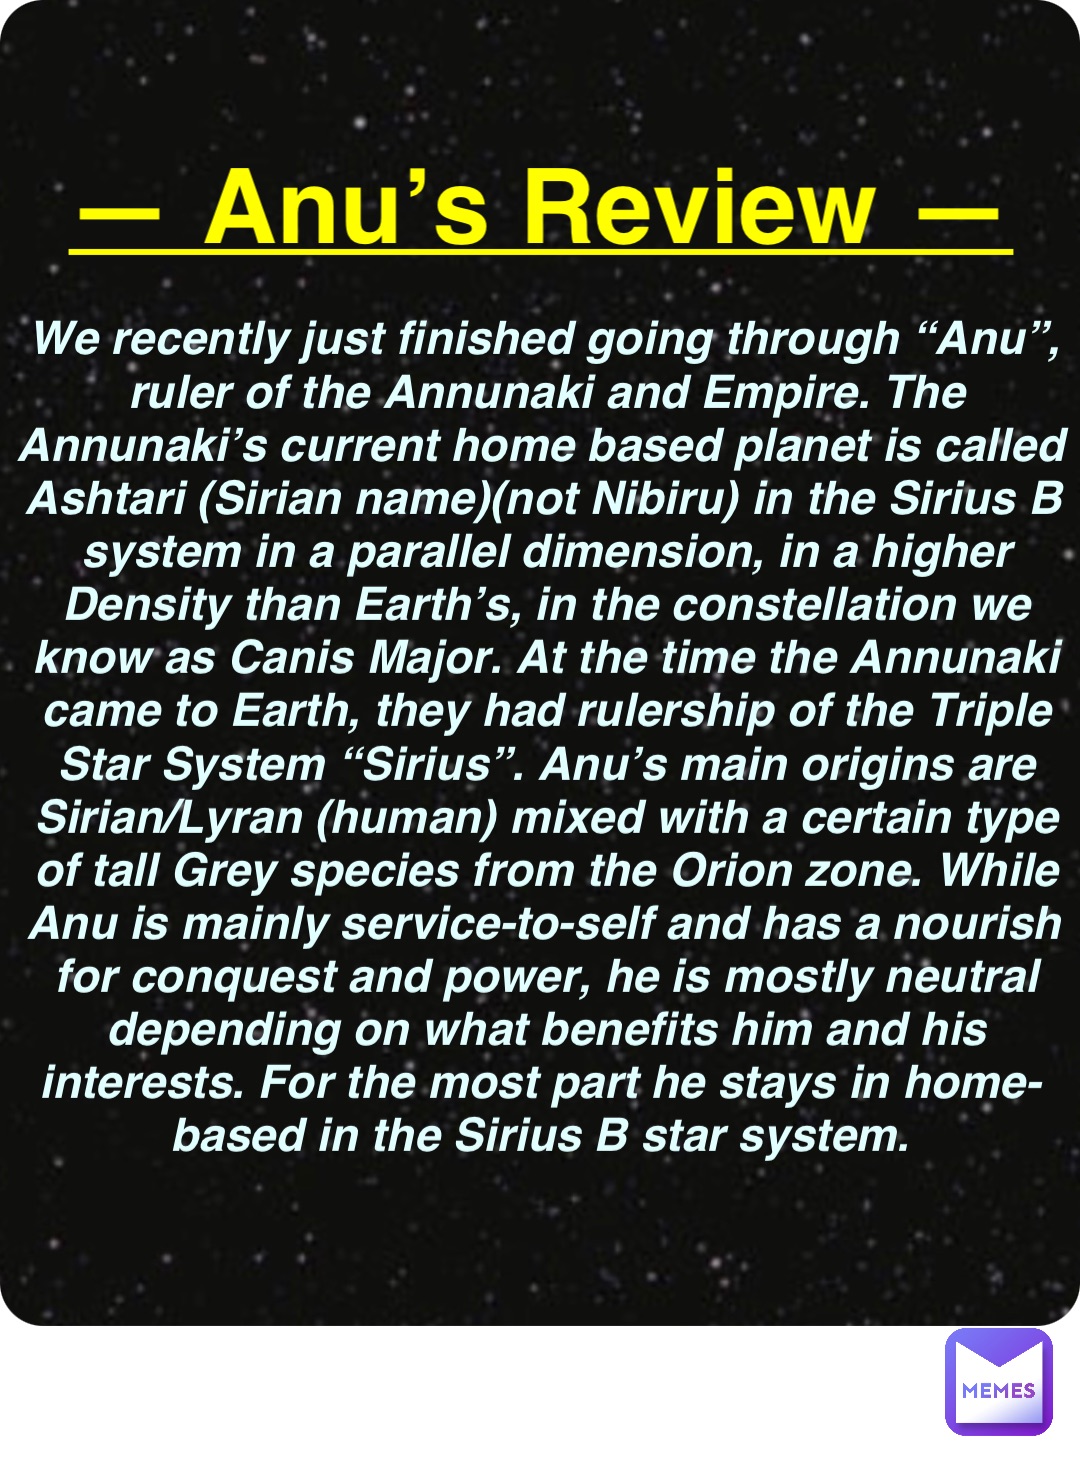 Double tap to edit — Anu’s Review — We recently just finished going through “Anu”, ruler of the Annunaki and Empire. The Annunaki’s current home based planet is called Ashtari (Sirian name)(not Nibiru) in the Sirius B system in a parallel dimension, in a higher Density than Earth’s, in the constellation we know as Canis Major. At the time the Annunaki came to Earth, they had rulership of the Triple Star System “Sirius”. Anu’s main origins are Sirian/Lyran (human) mixed with a certain type of tall Grey species from the Orion zone. While Anu is mainly service-to-self and has a nourish for conquest and power, he is mostly neutral depending on what benefits him and his interests. For the most part he stays in home-based in the Sirius B star system.